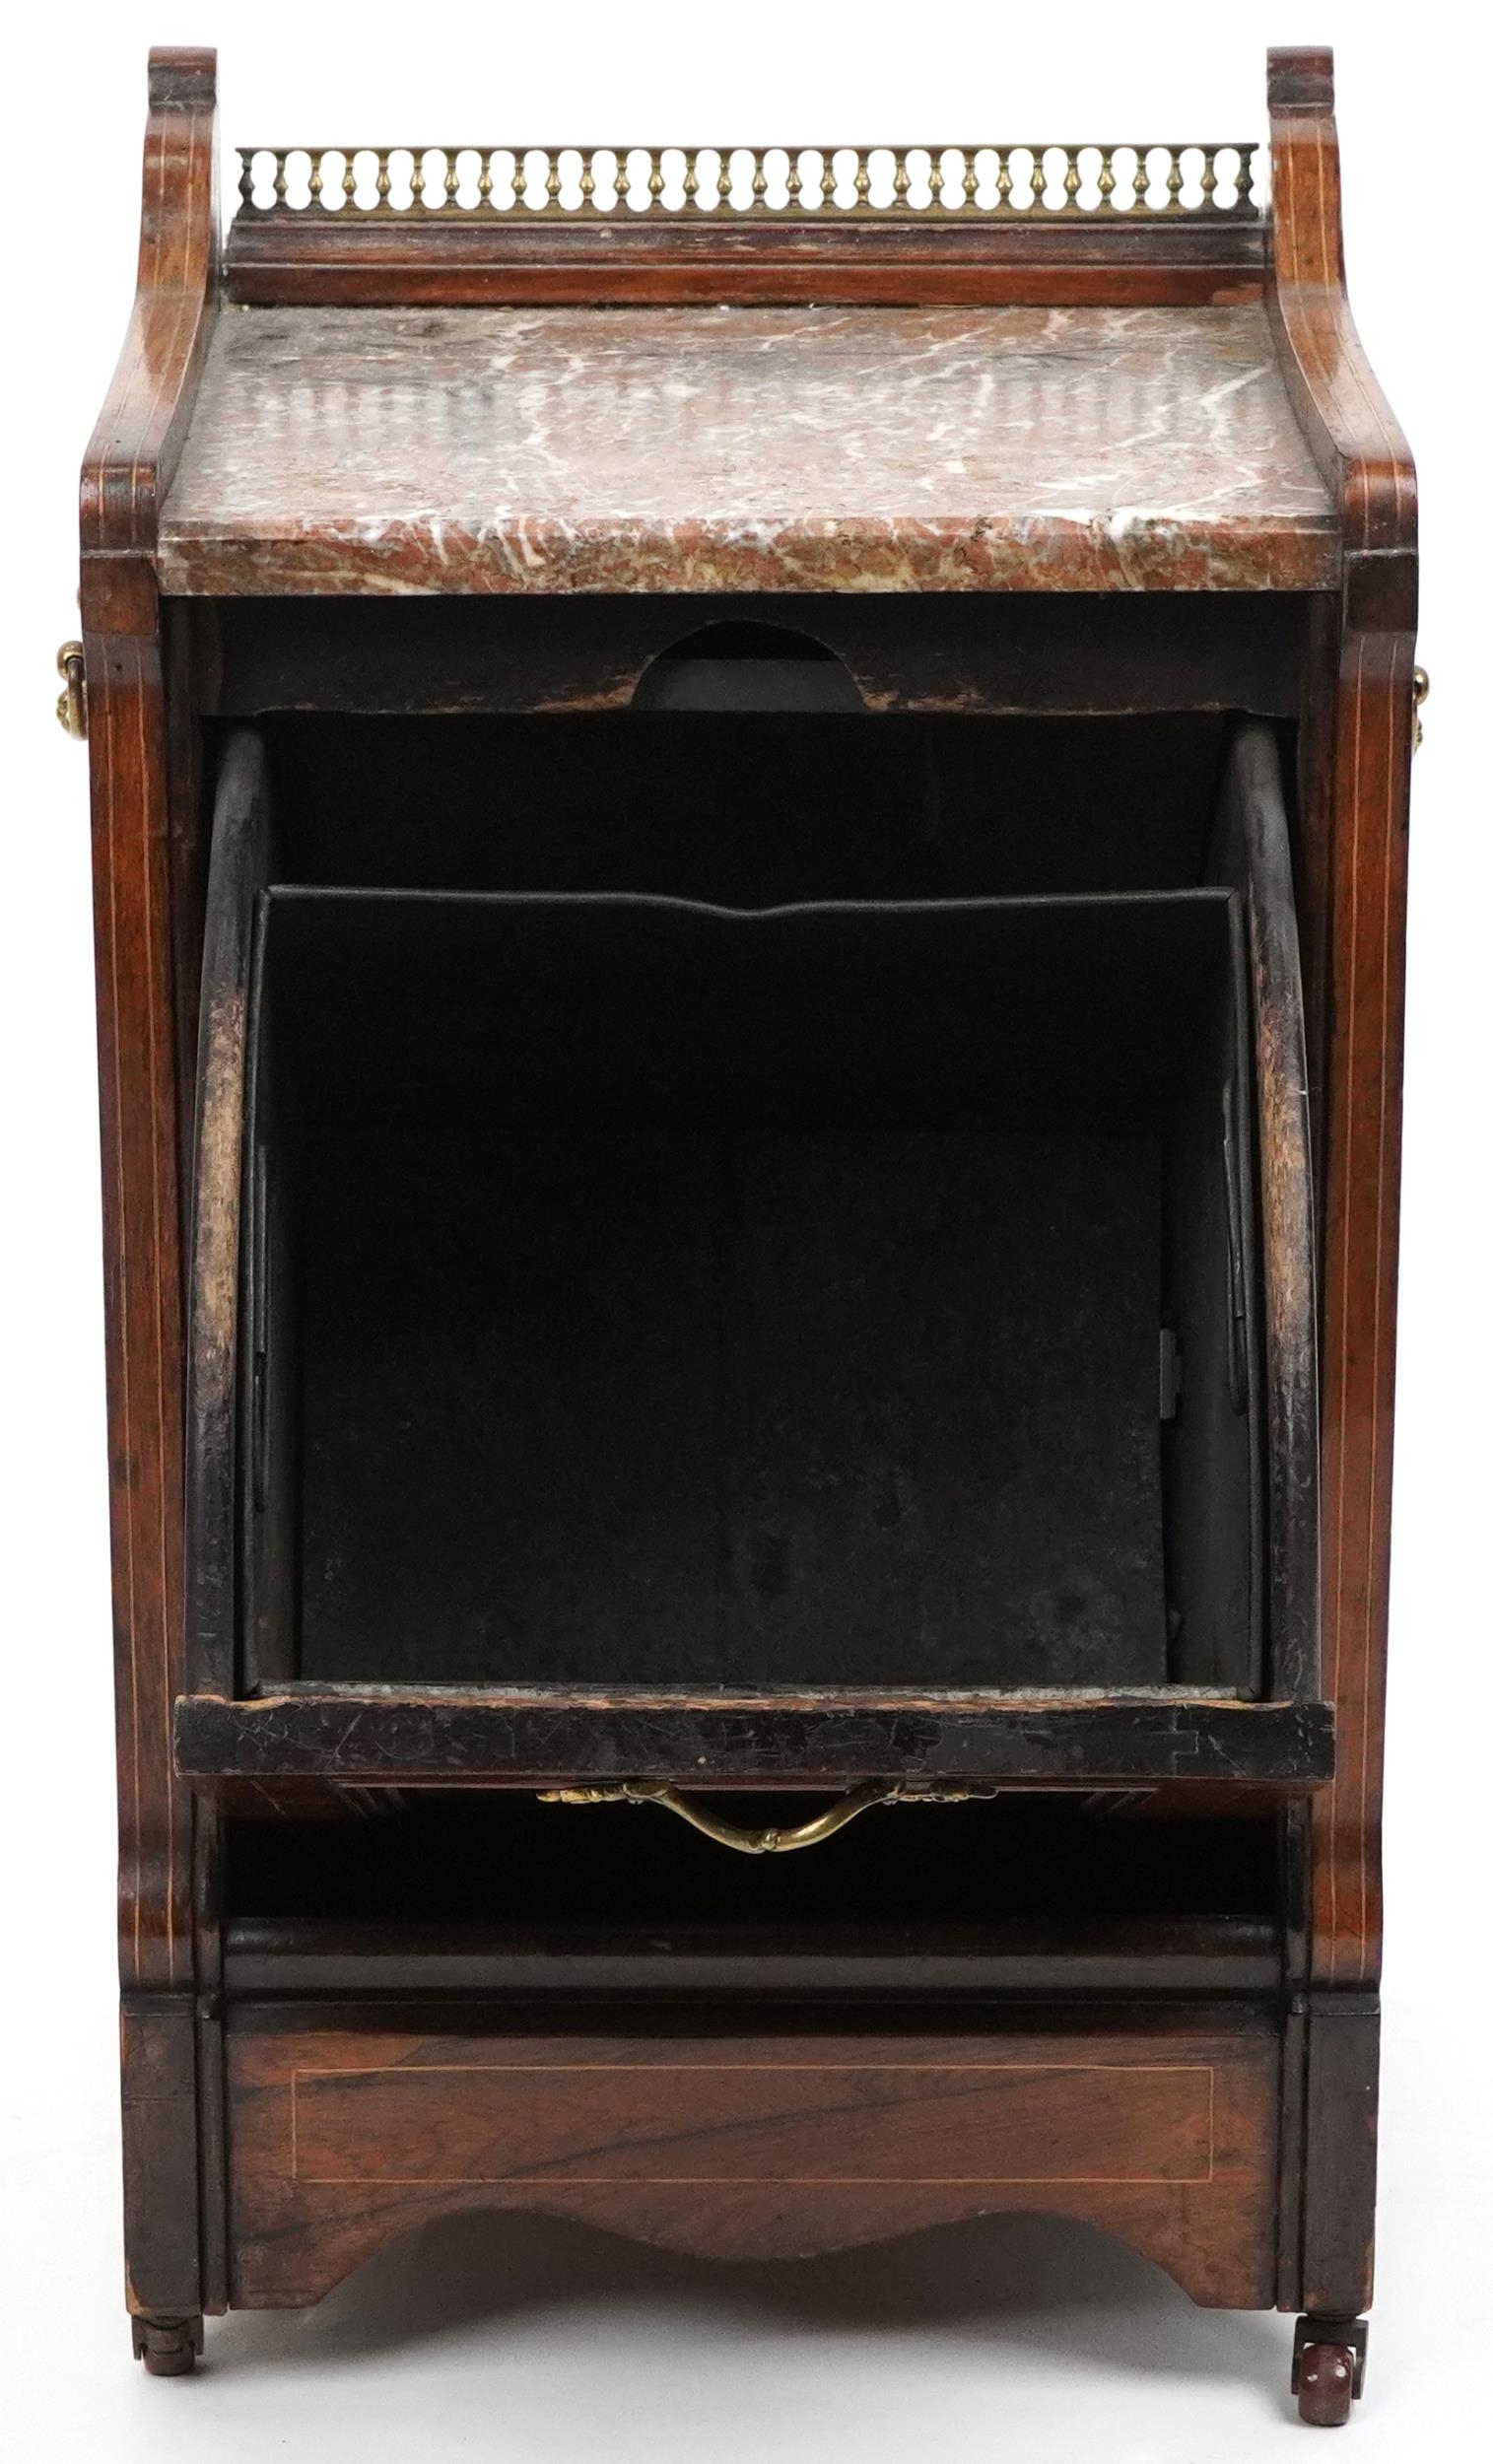 Victorian inlaid rosewood coal scuttle with marble top and brass mounts, 64cm H x 36cm W x 33.5cm D - Image 3 of 5